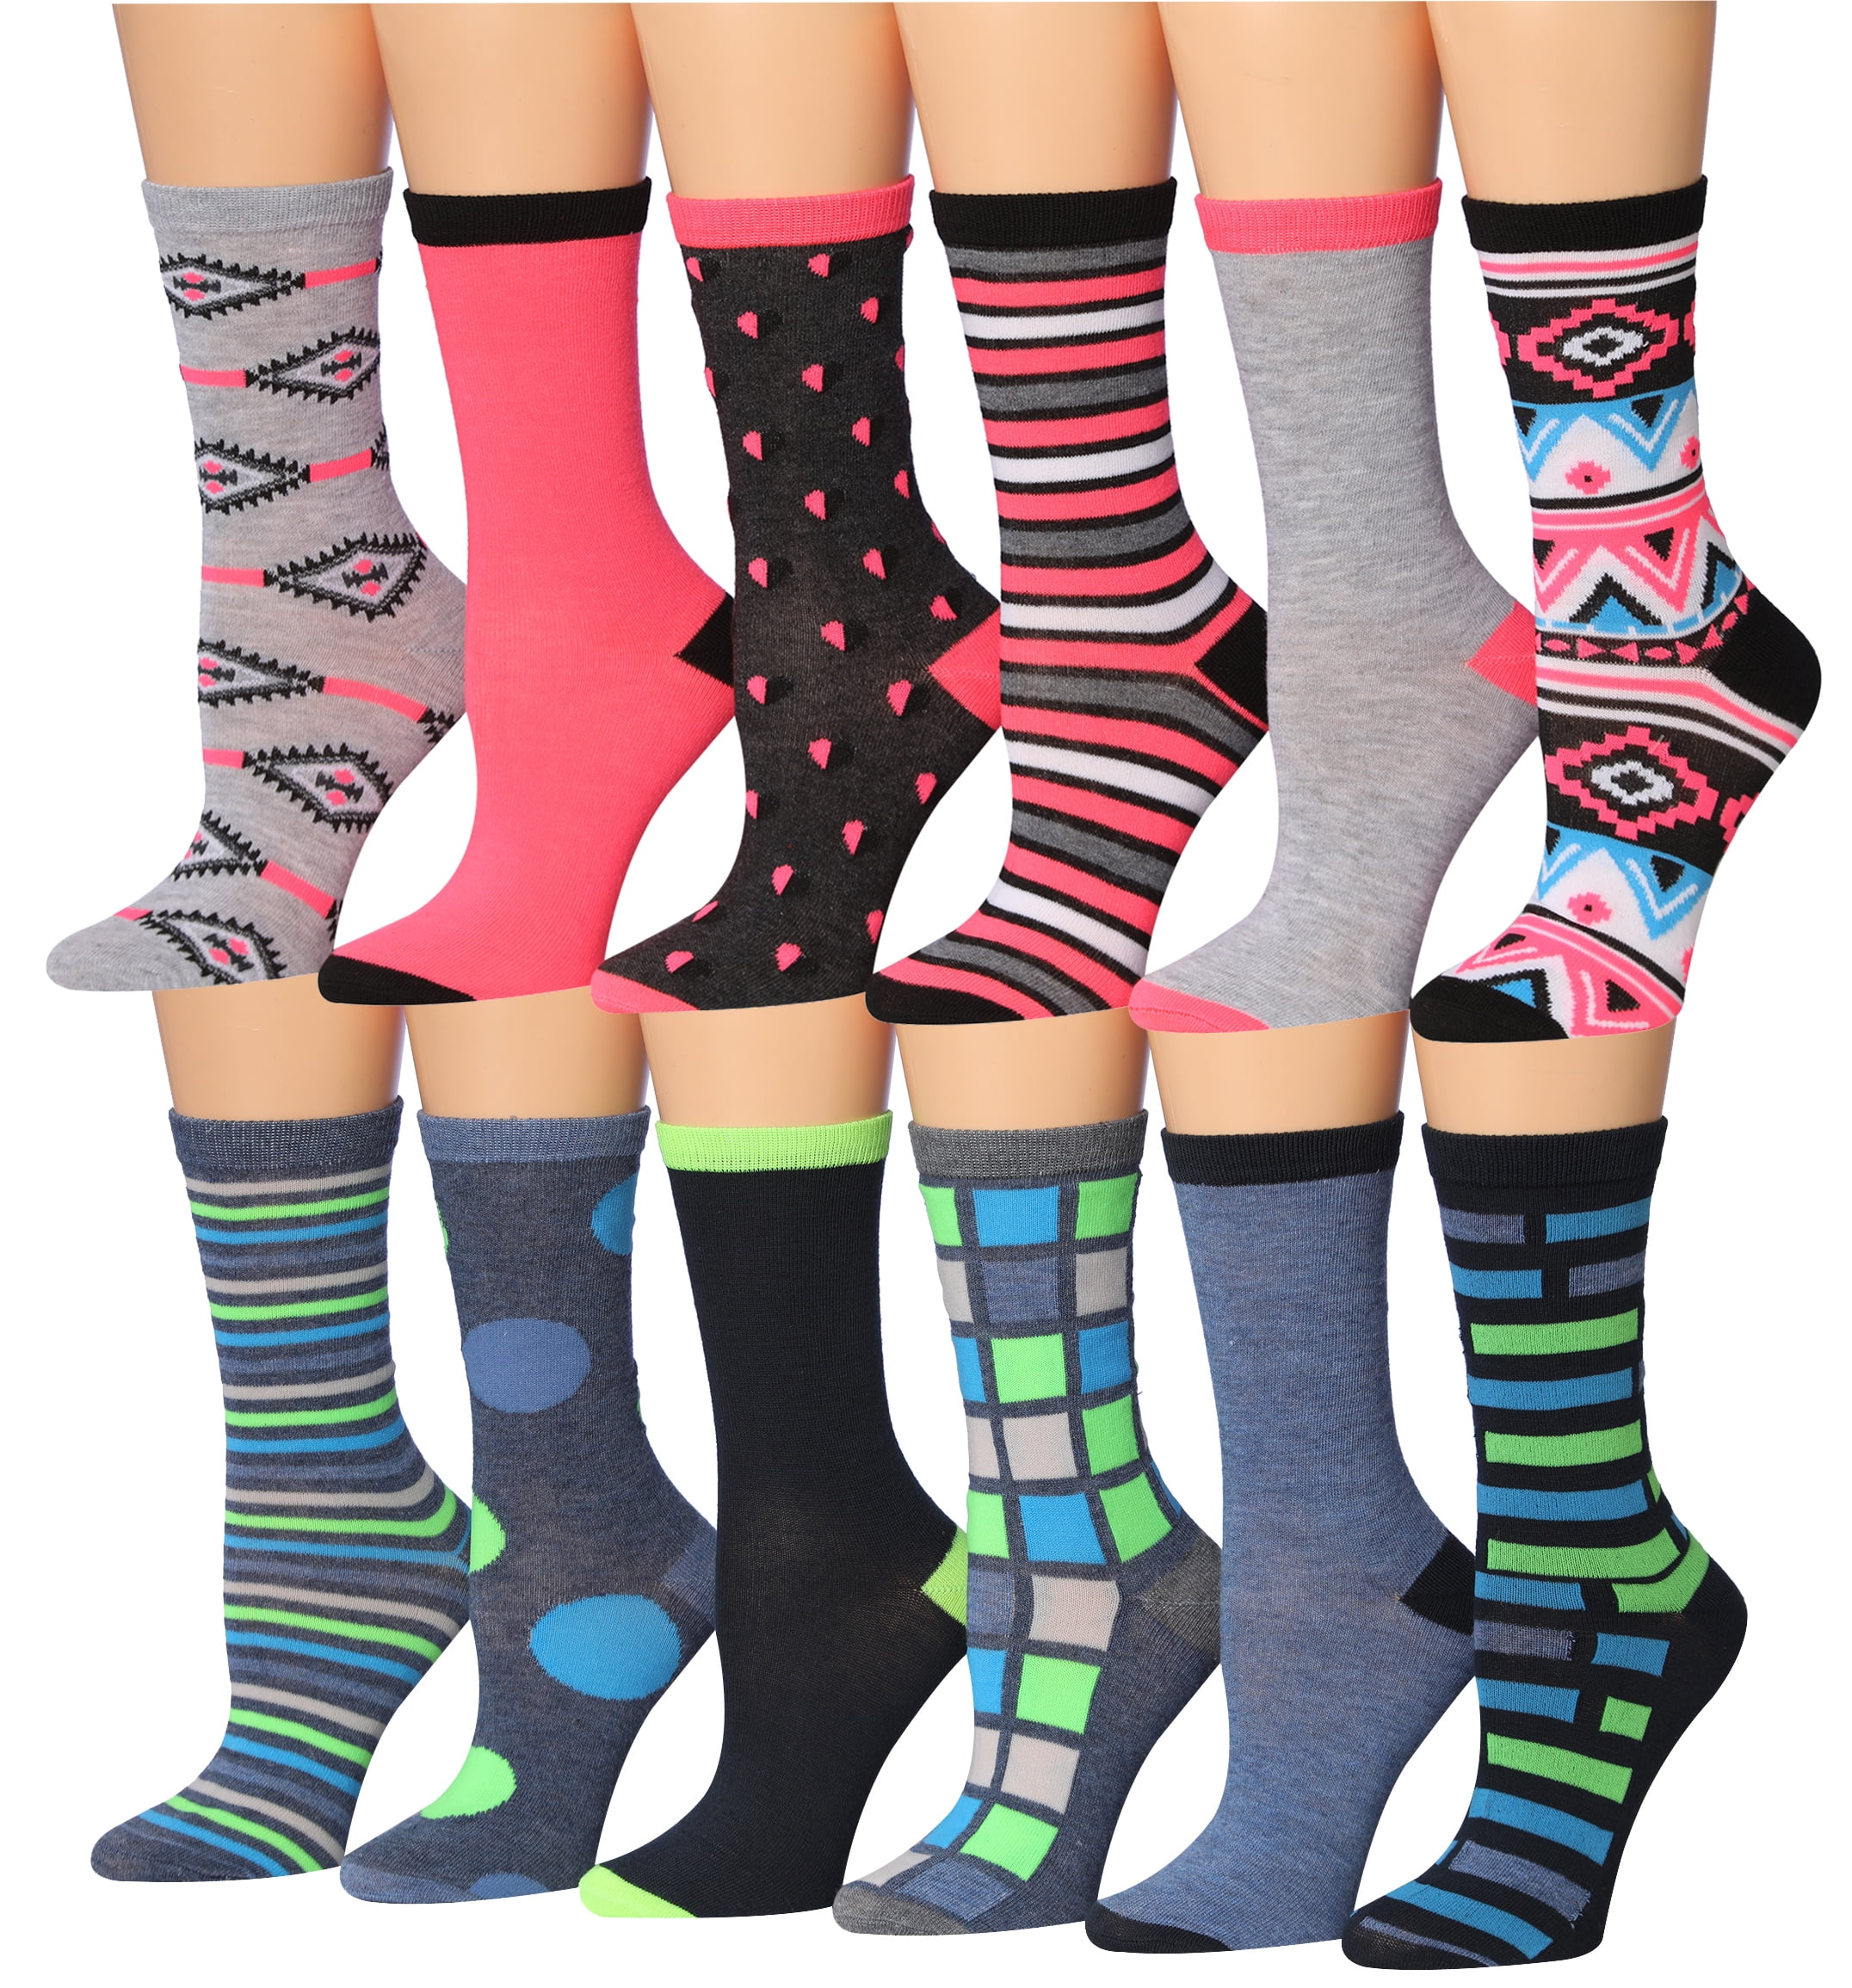 Colorfut Women's 12 Pairs Colorful Patterned Crew Socks WC72-AB ...